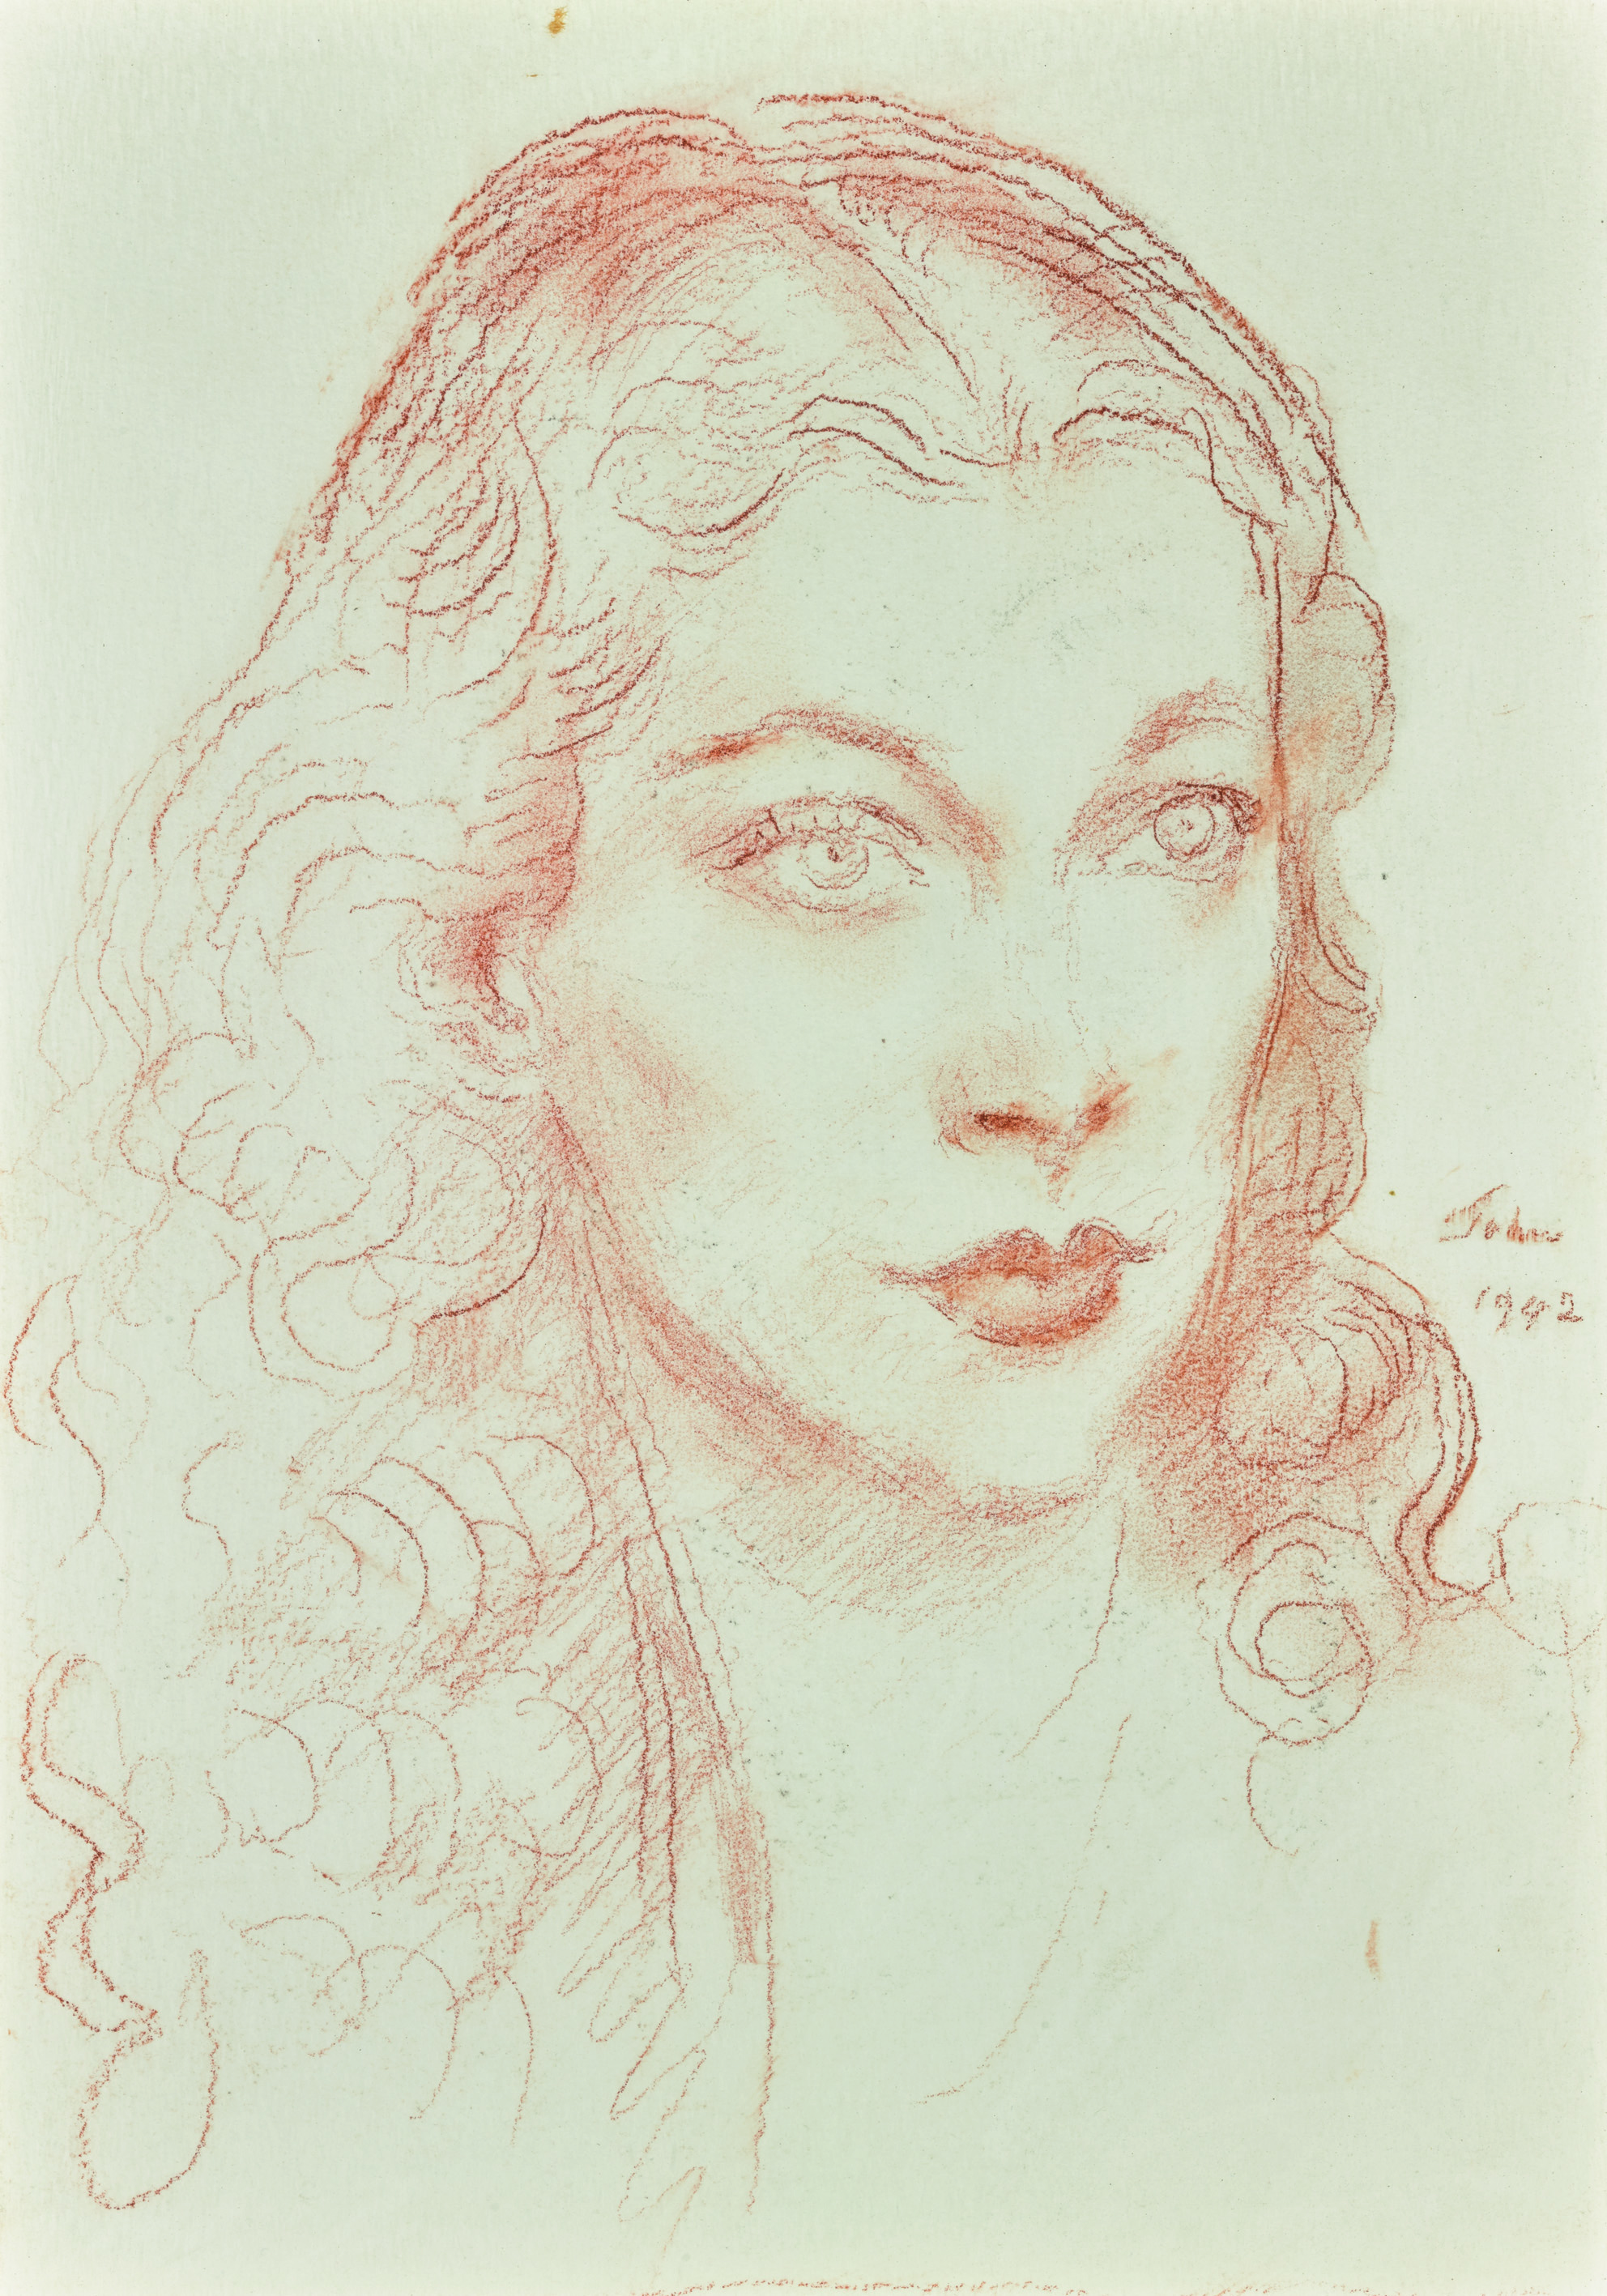 Red chalk portrait of Vivien Leigh from 1942 (Sotheby's)